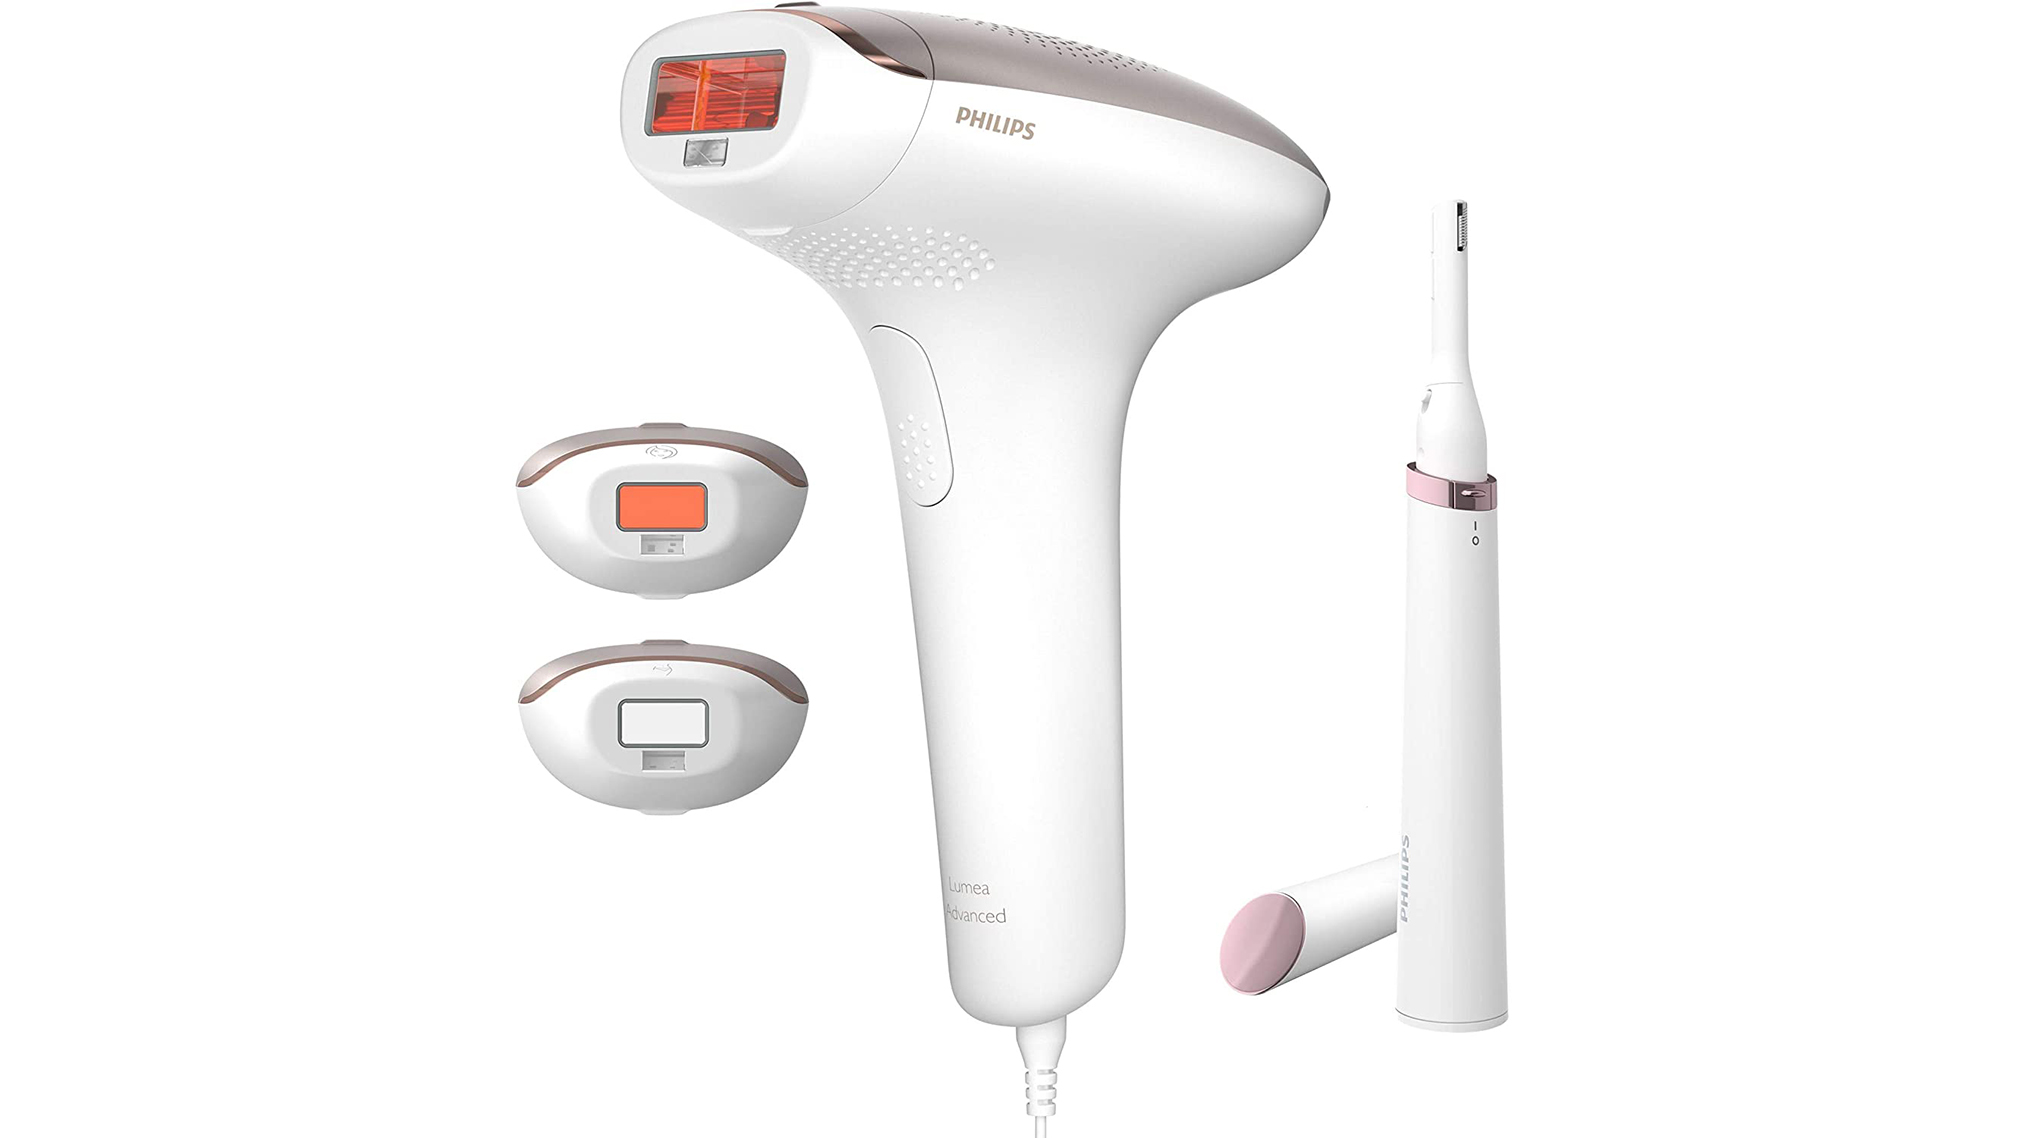 Philips Lumea laser hair removal